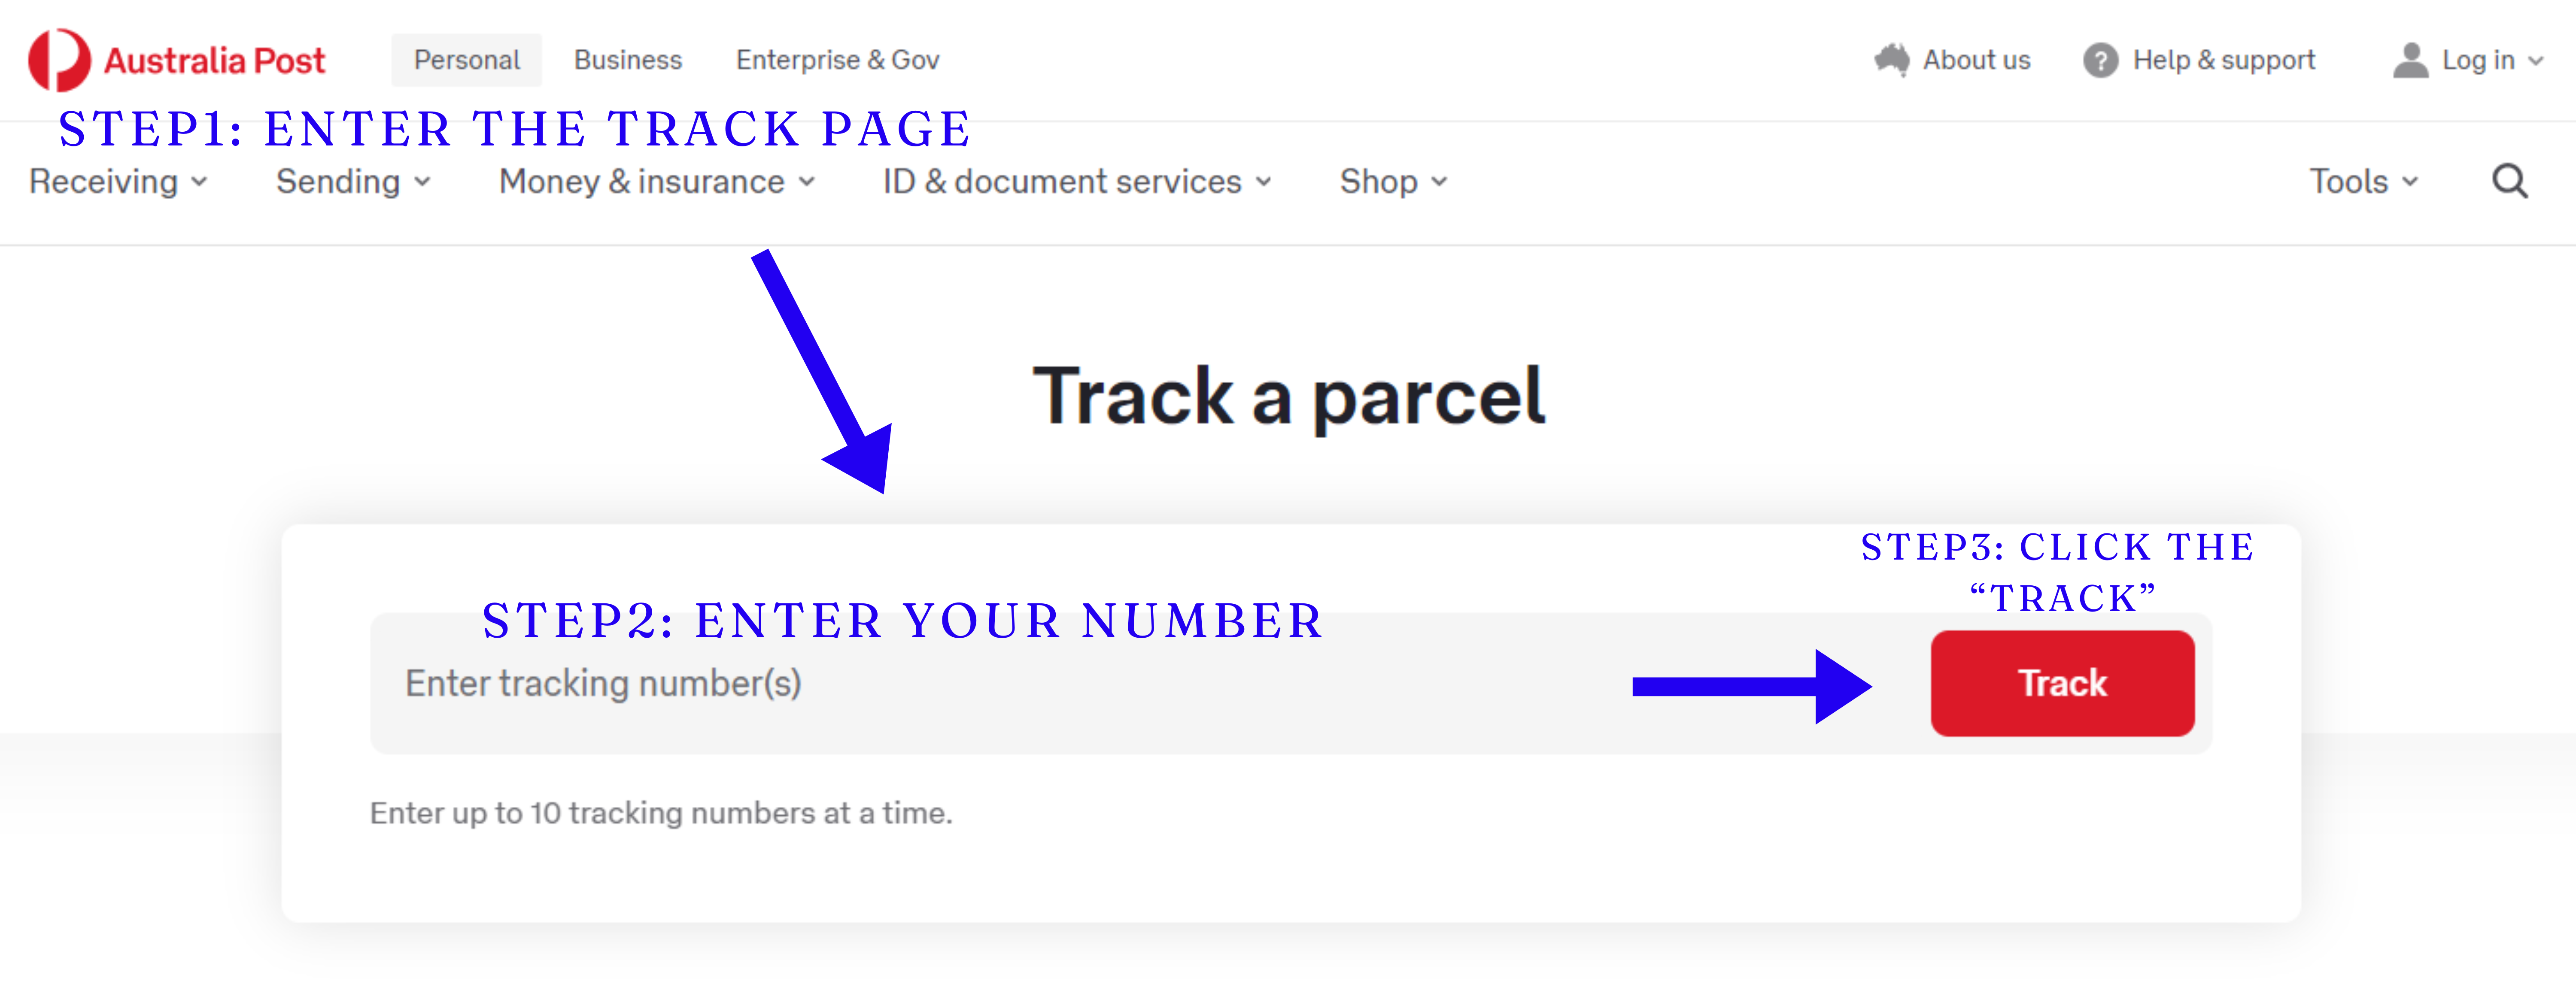 Australia Post Tracking. Learn how to find your tracking number on Australia Post. Enter your tracking number on the Australia Post official website.